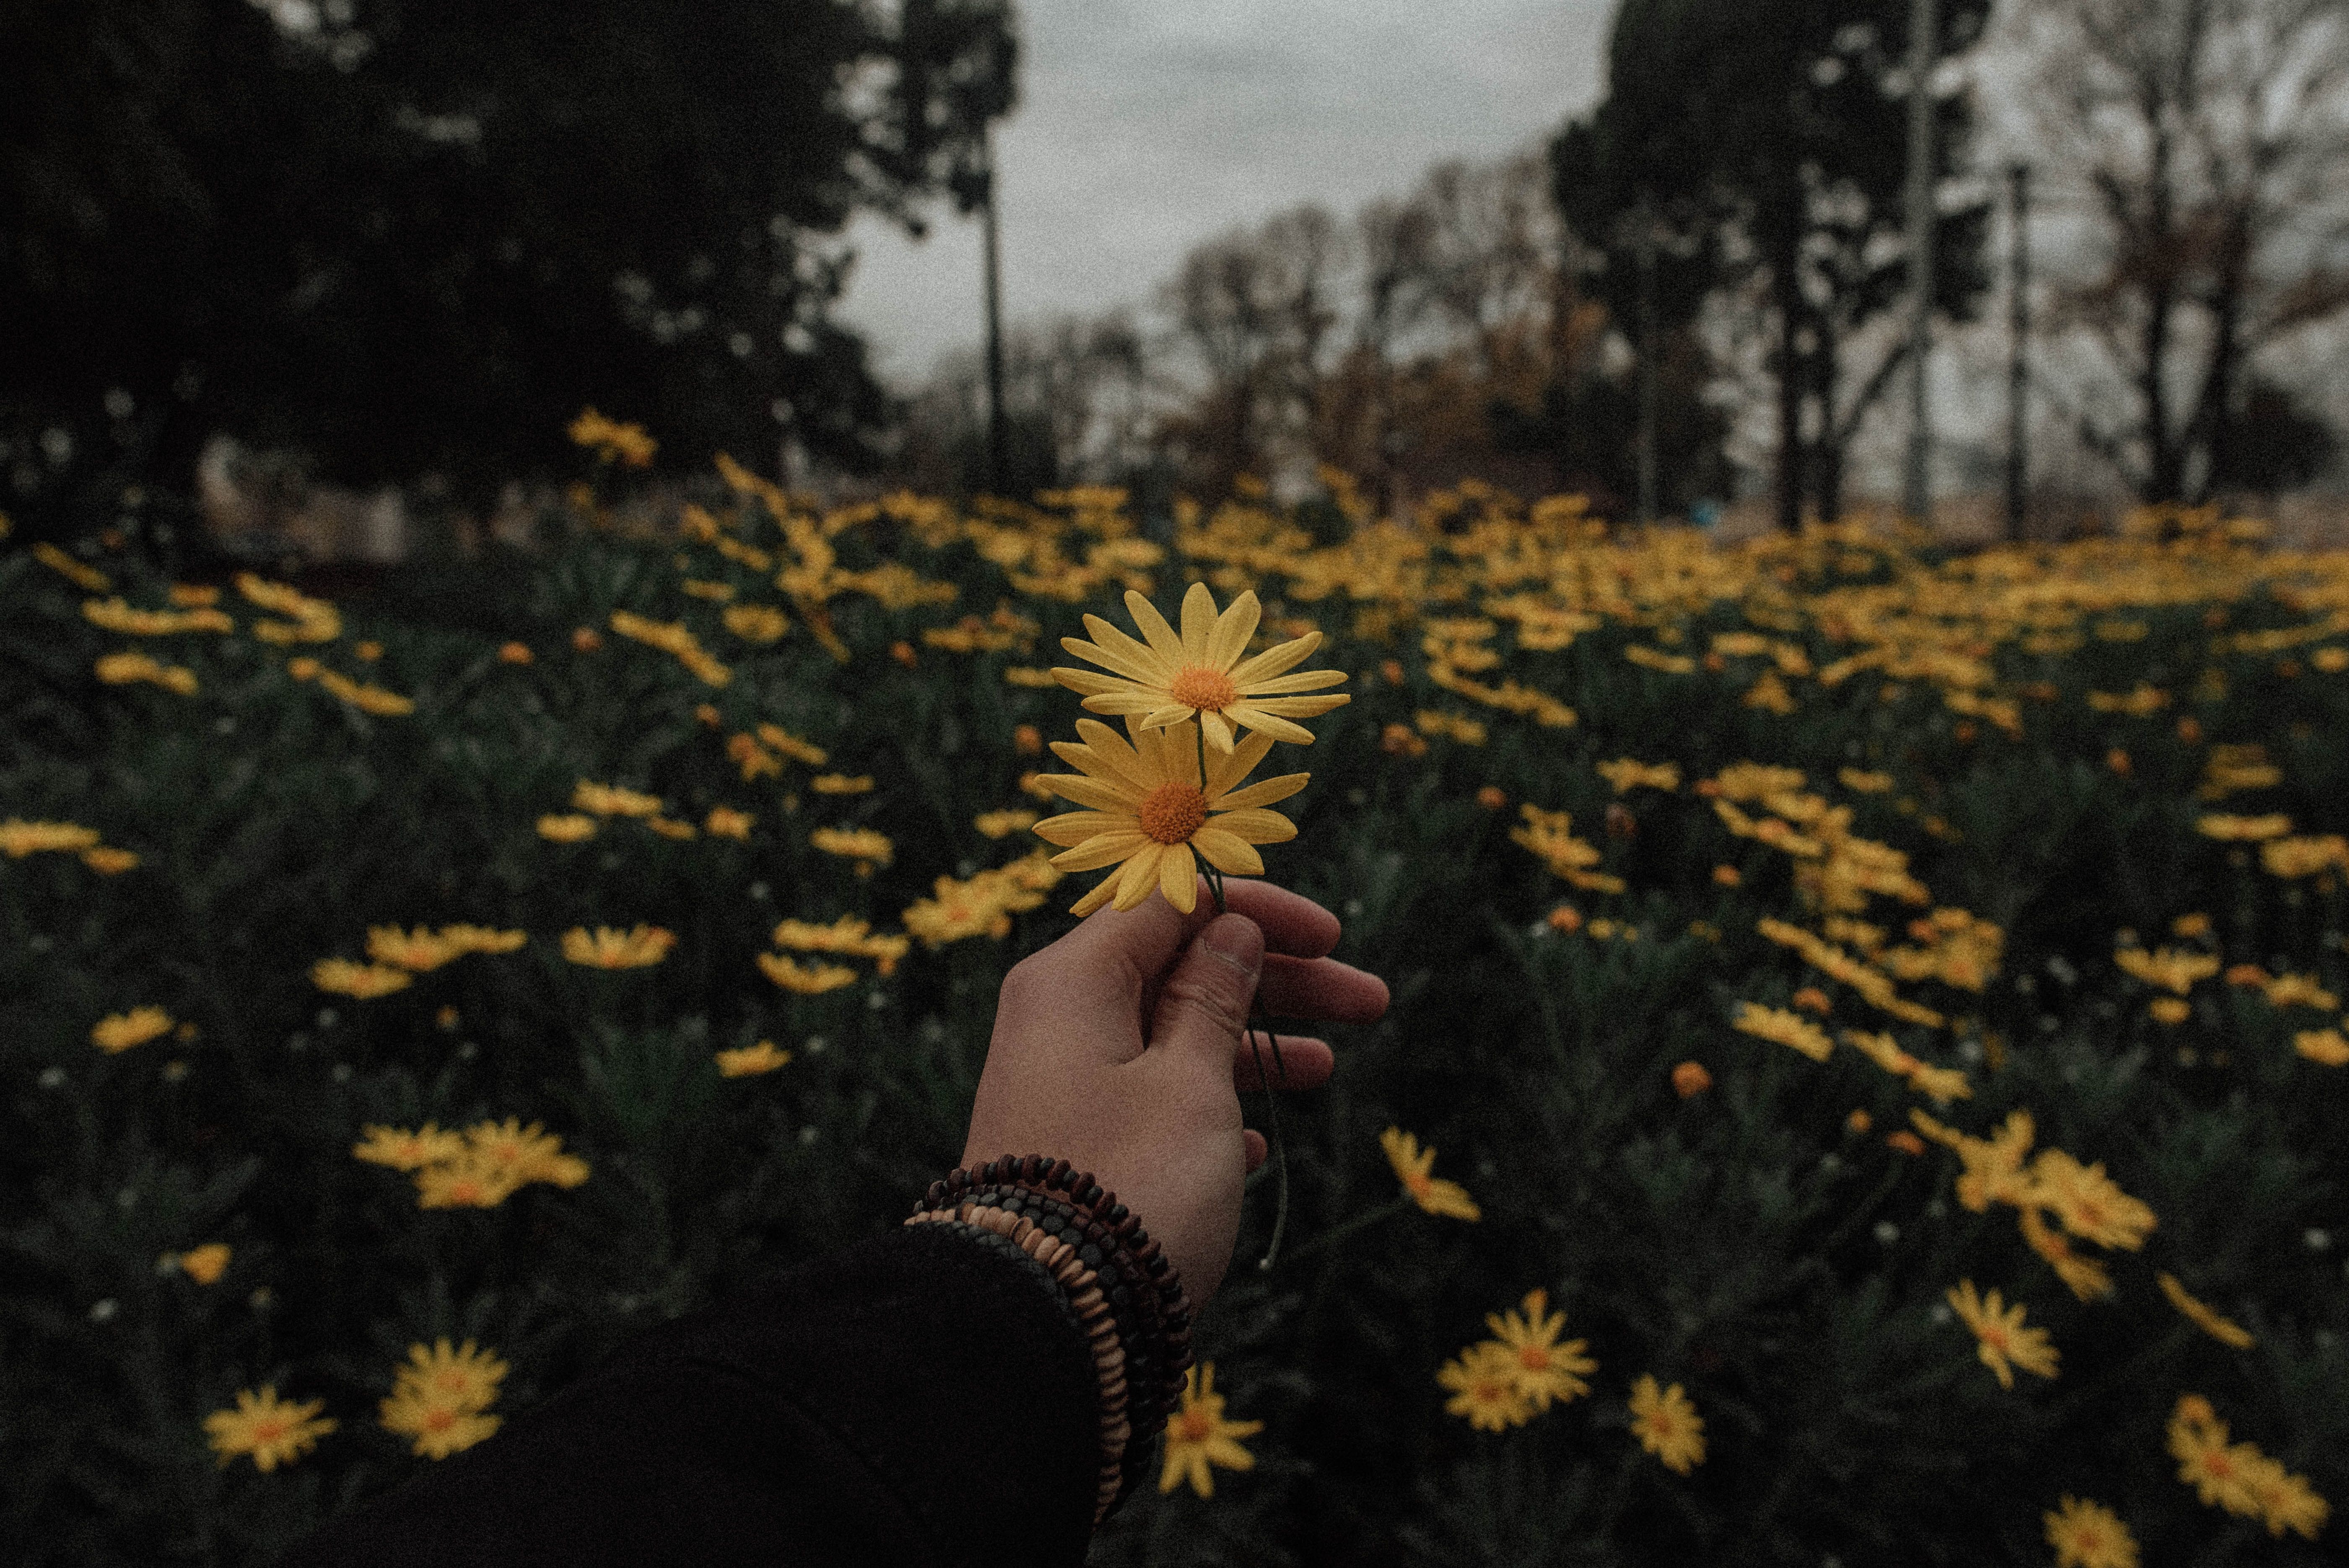 5603x3740 vintage, aesthetic, holding out flower, lve, flower, flowers, Free picture, retro, yellow, tumblr, grunge, love, hand, field, yellow flower Gallery HD Wallpaper